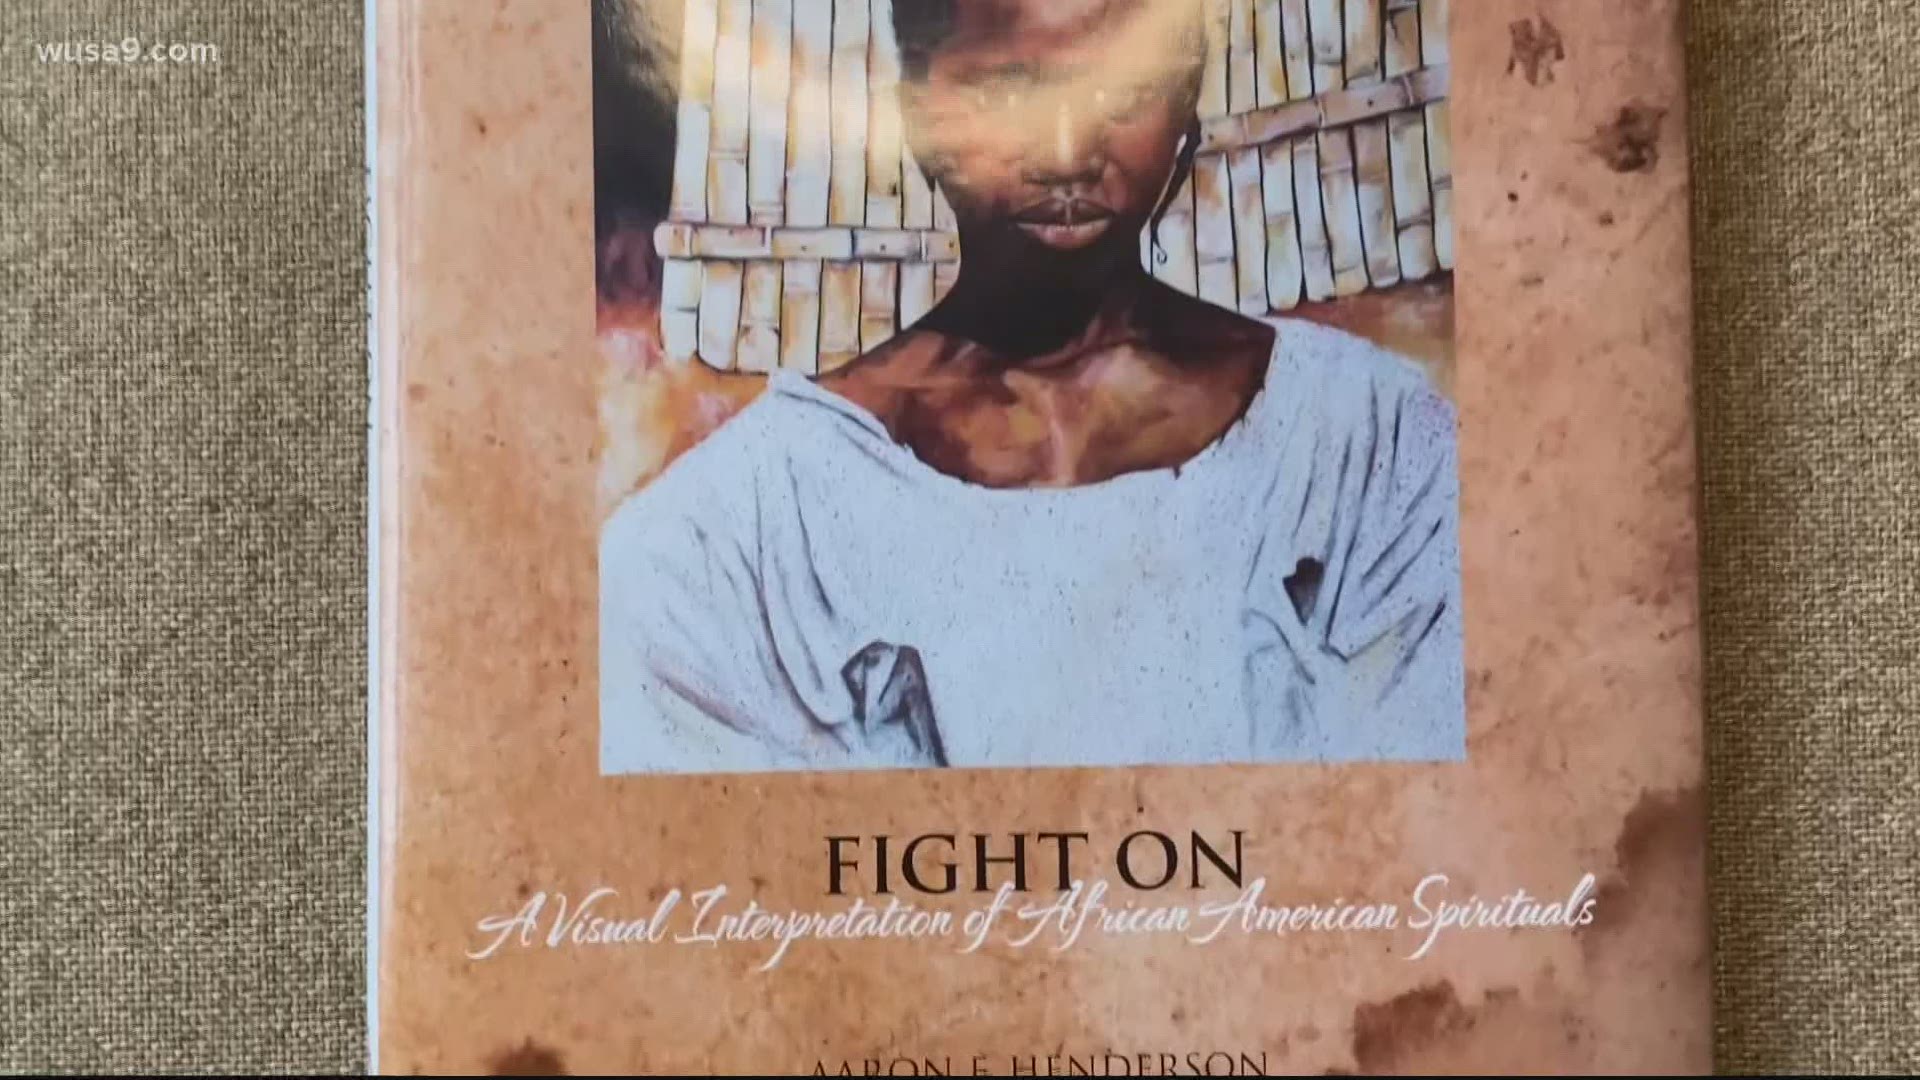 The book, titled "Fight On," brings spirituals to life.